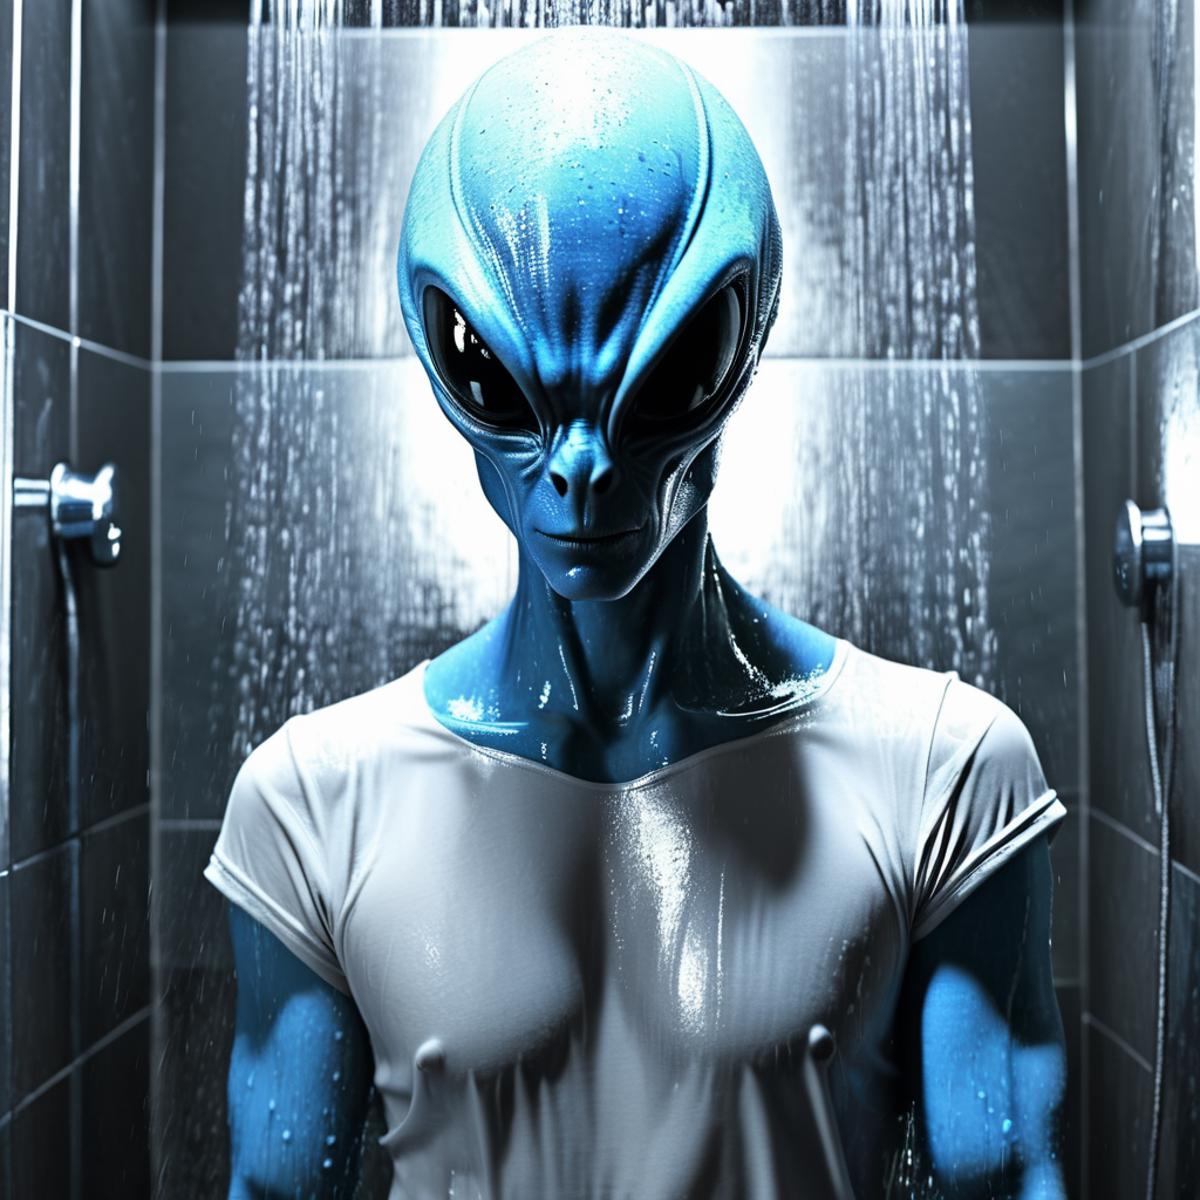 Man with blue skin standing in a shower, wearing a white shirt.